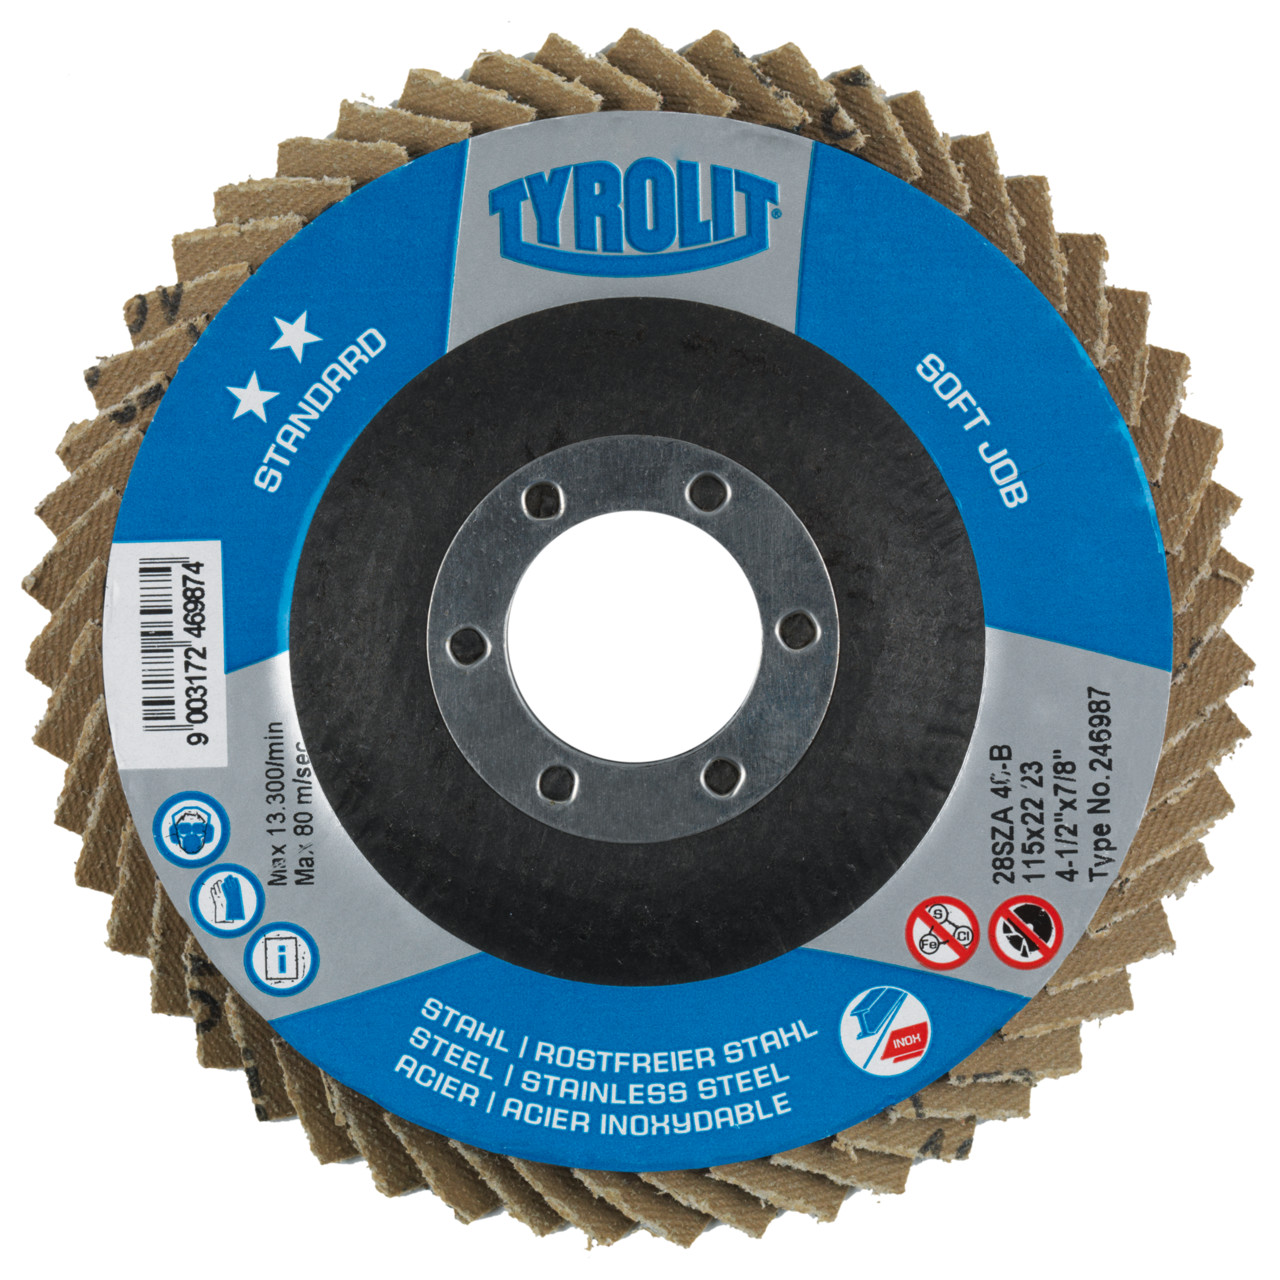 TYROLIT SOFTJOB DxH 125x22.23 2in1 for steel and stainless steel, P80, shape: 28S - straight version (SOFTJOB serrated lock washer), Art. 246998